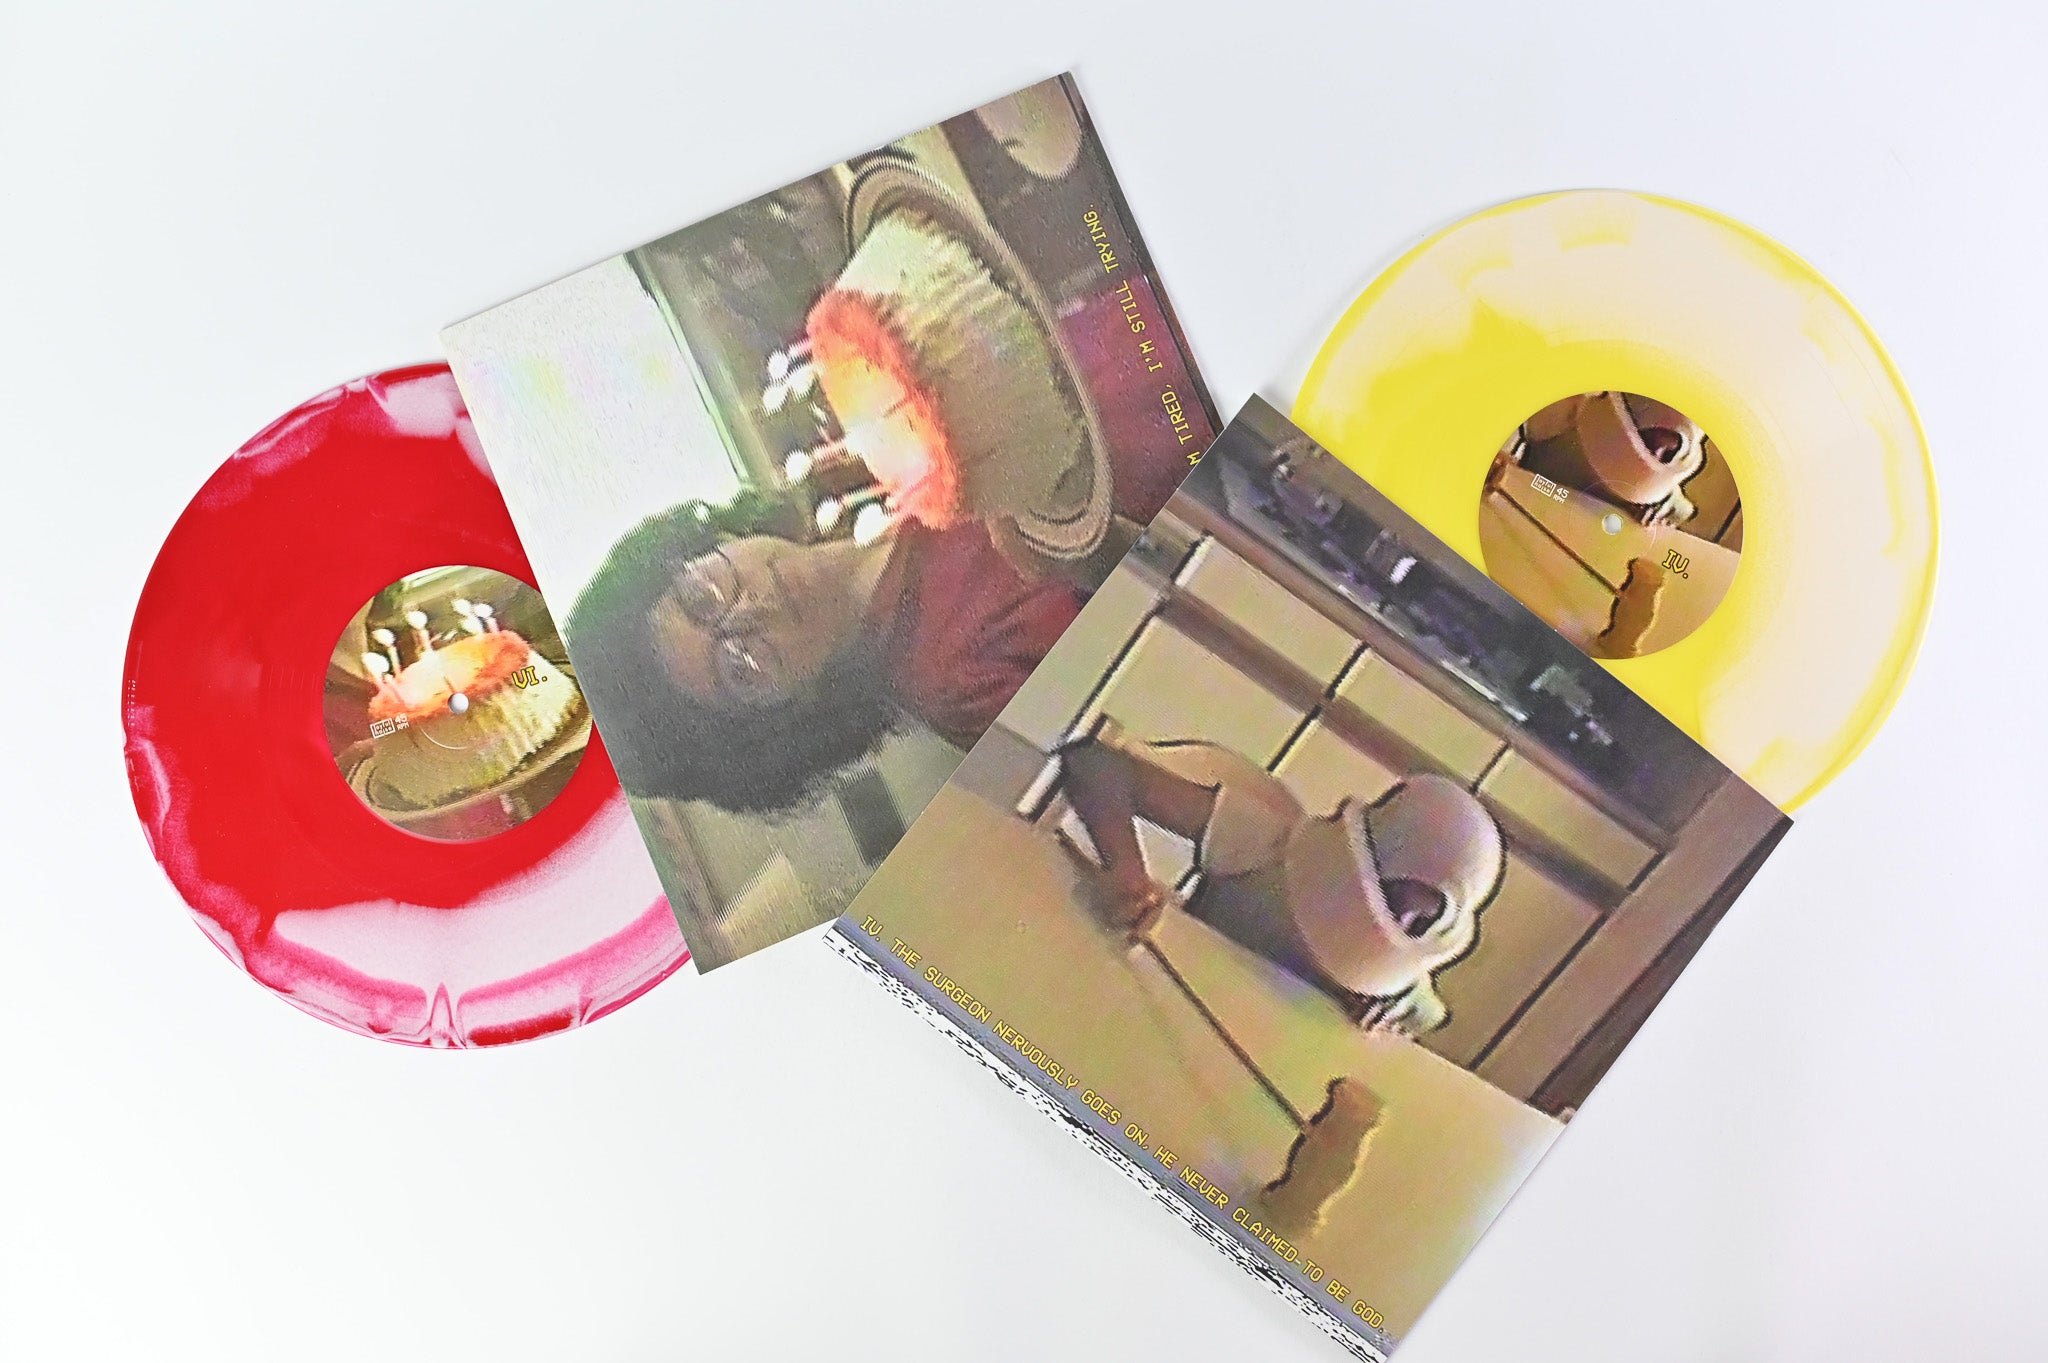 Why? - Aokohio on Joyful Noise Recordings Limited, Numbered on Blue/Yellow/Red & Bone Vinyl 45 RPM